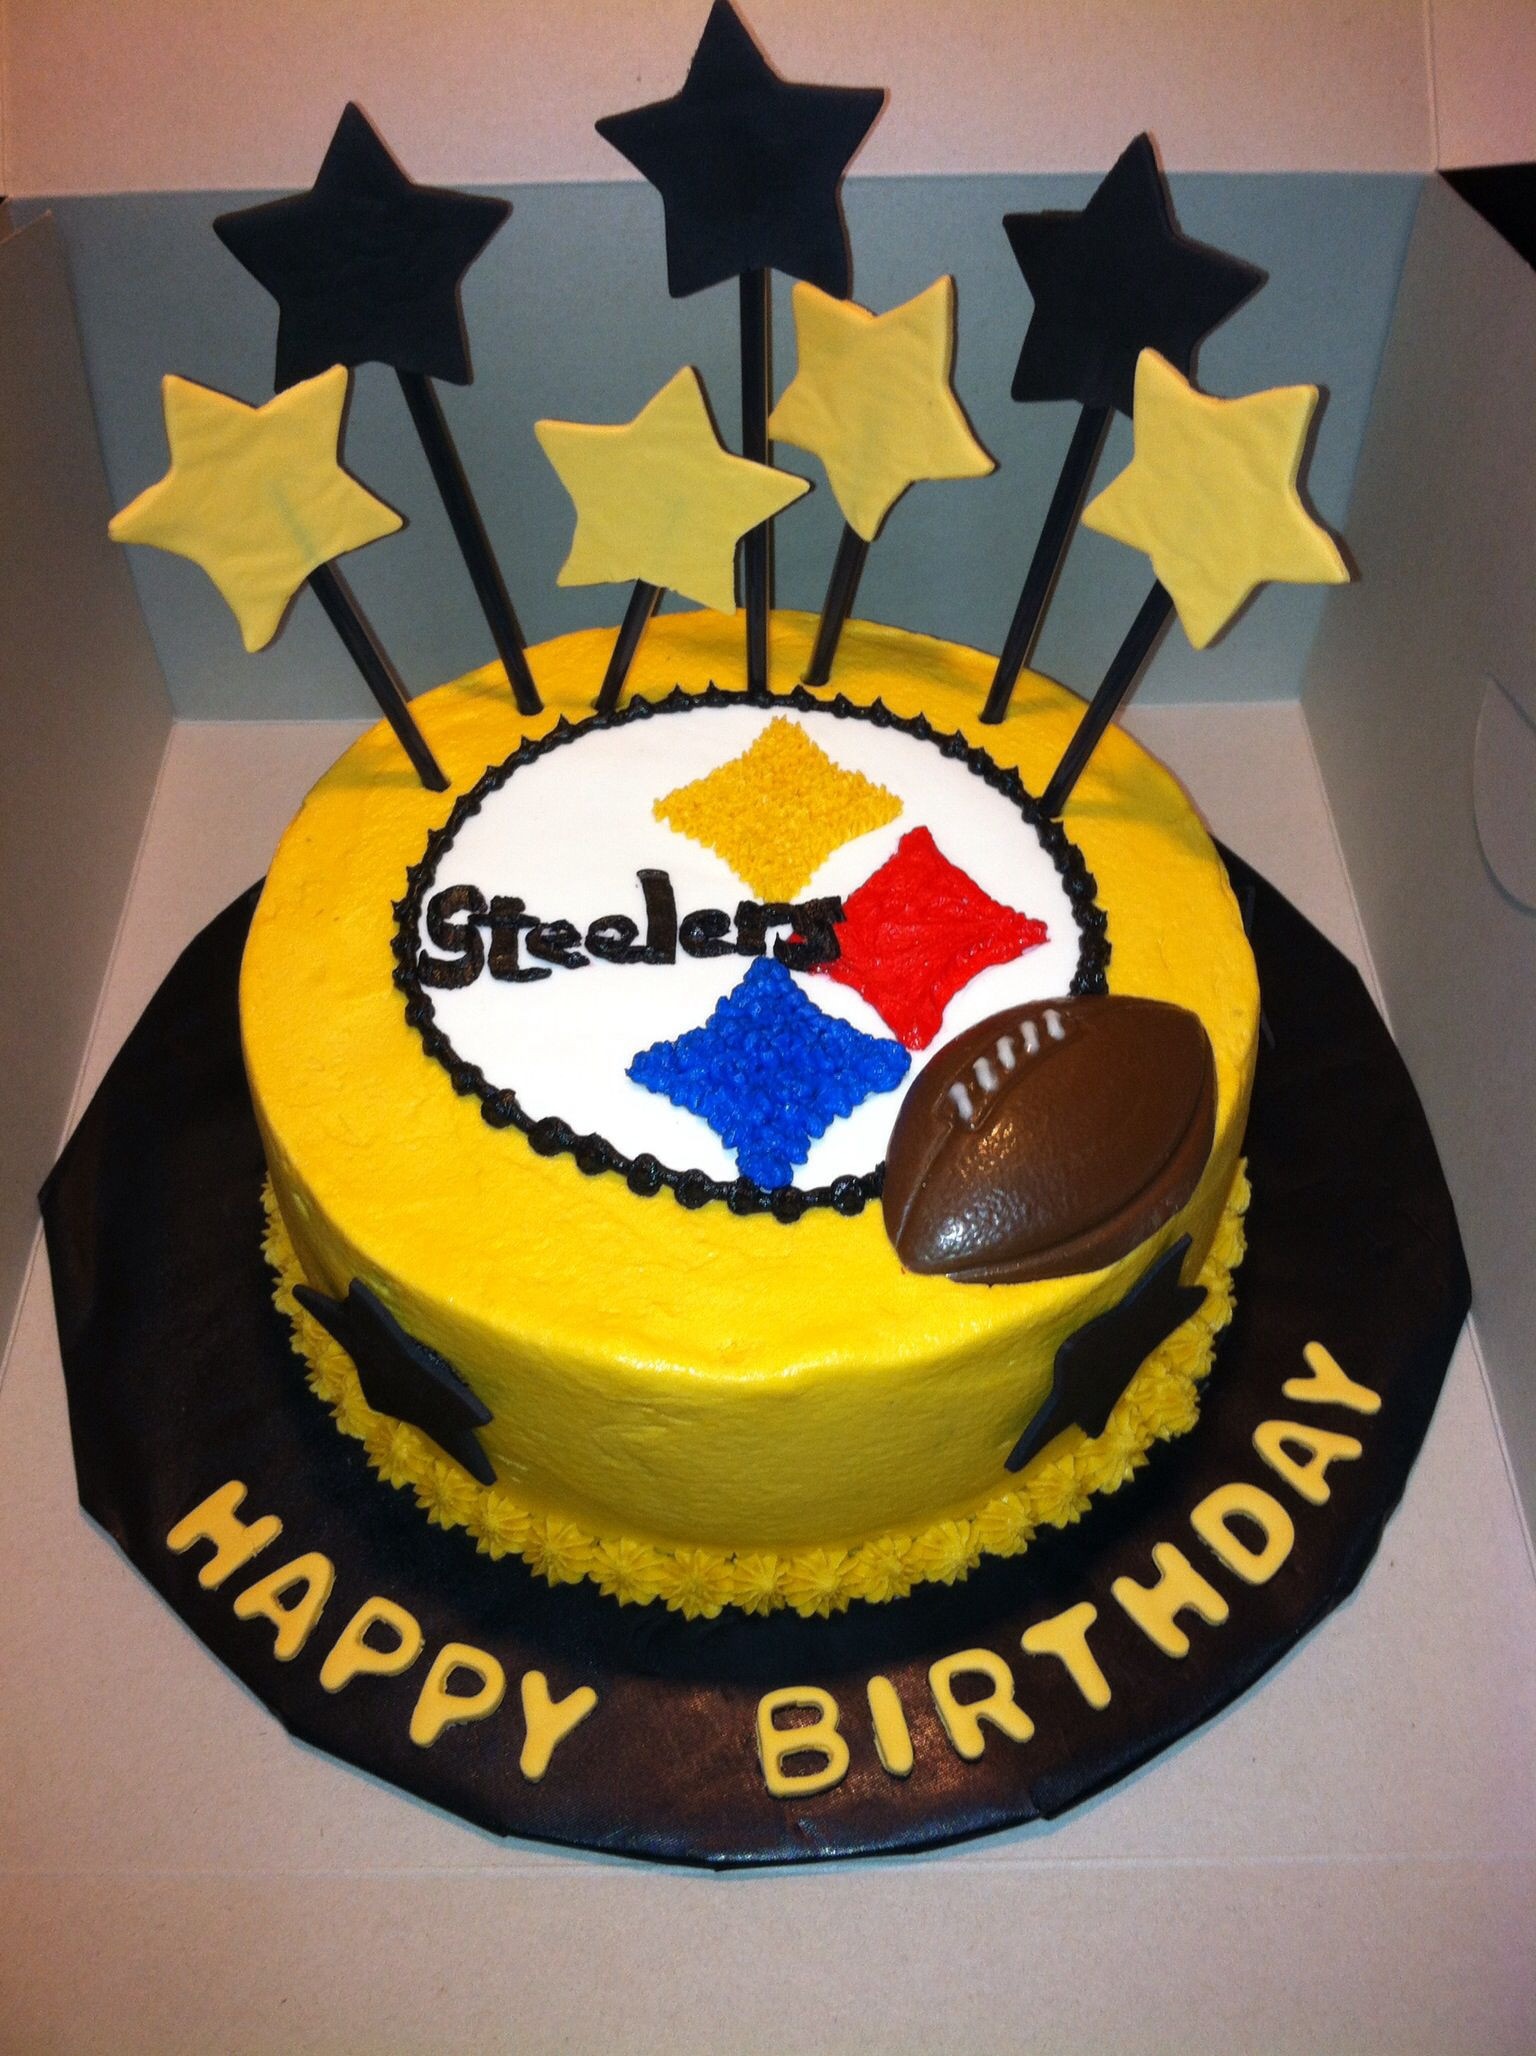 Pittsburgh Steelers Birthday Cake
 Steelers cake Things I have made